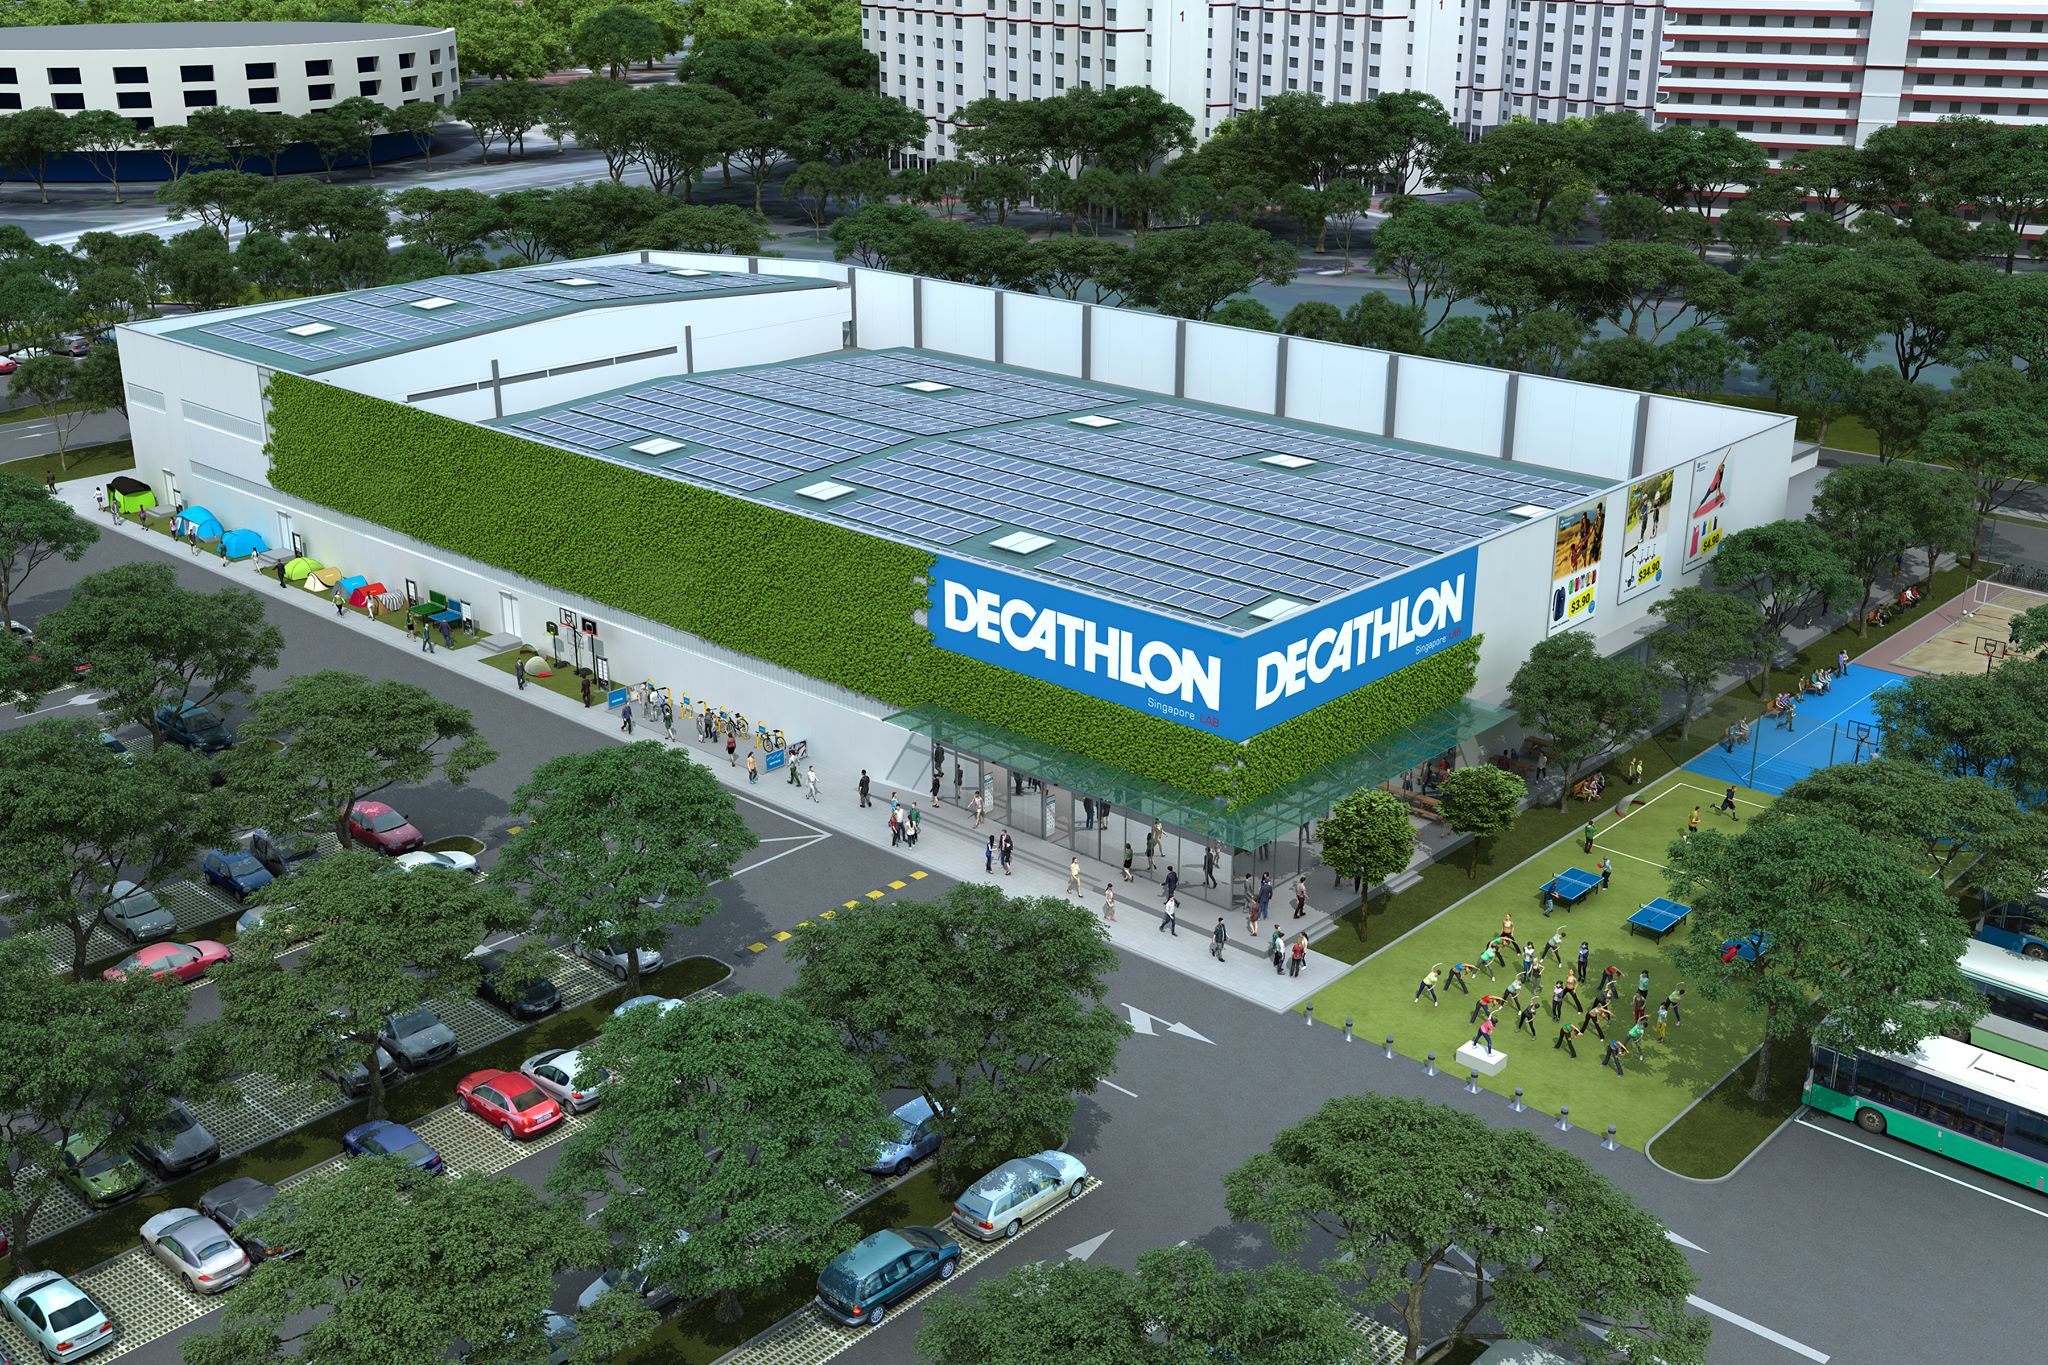 24-hour Decathlon outlet opening in 